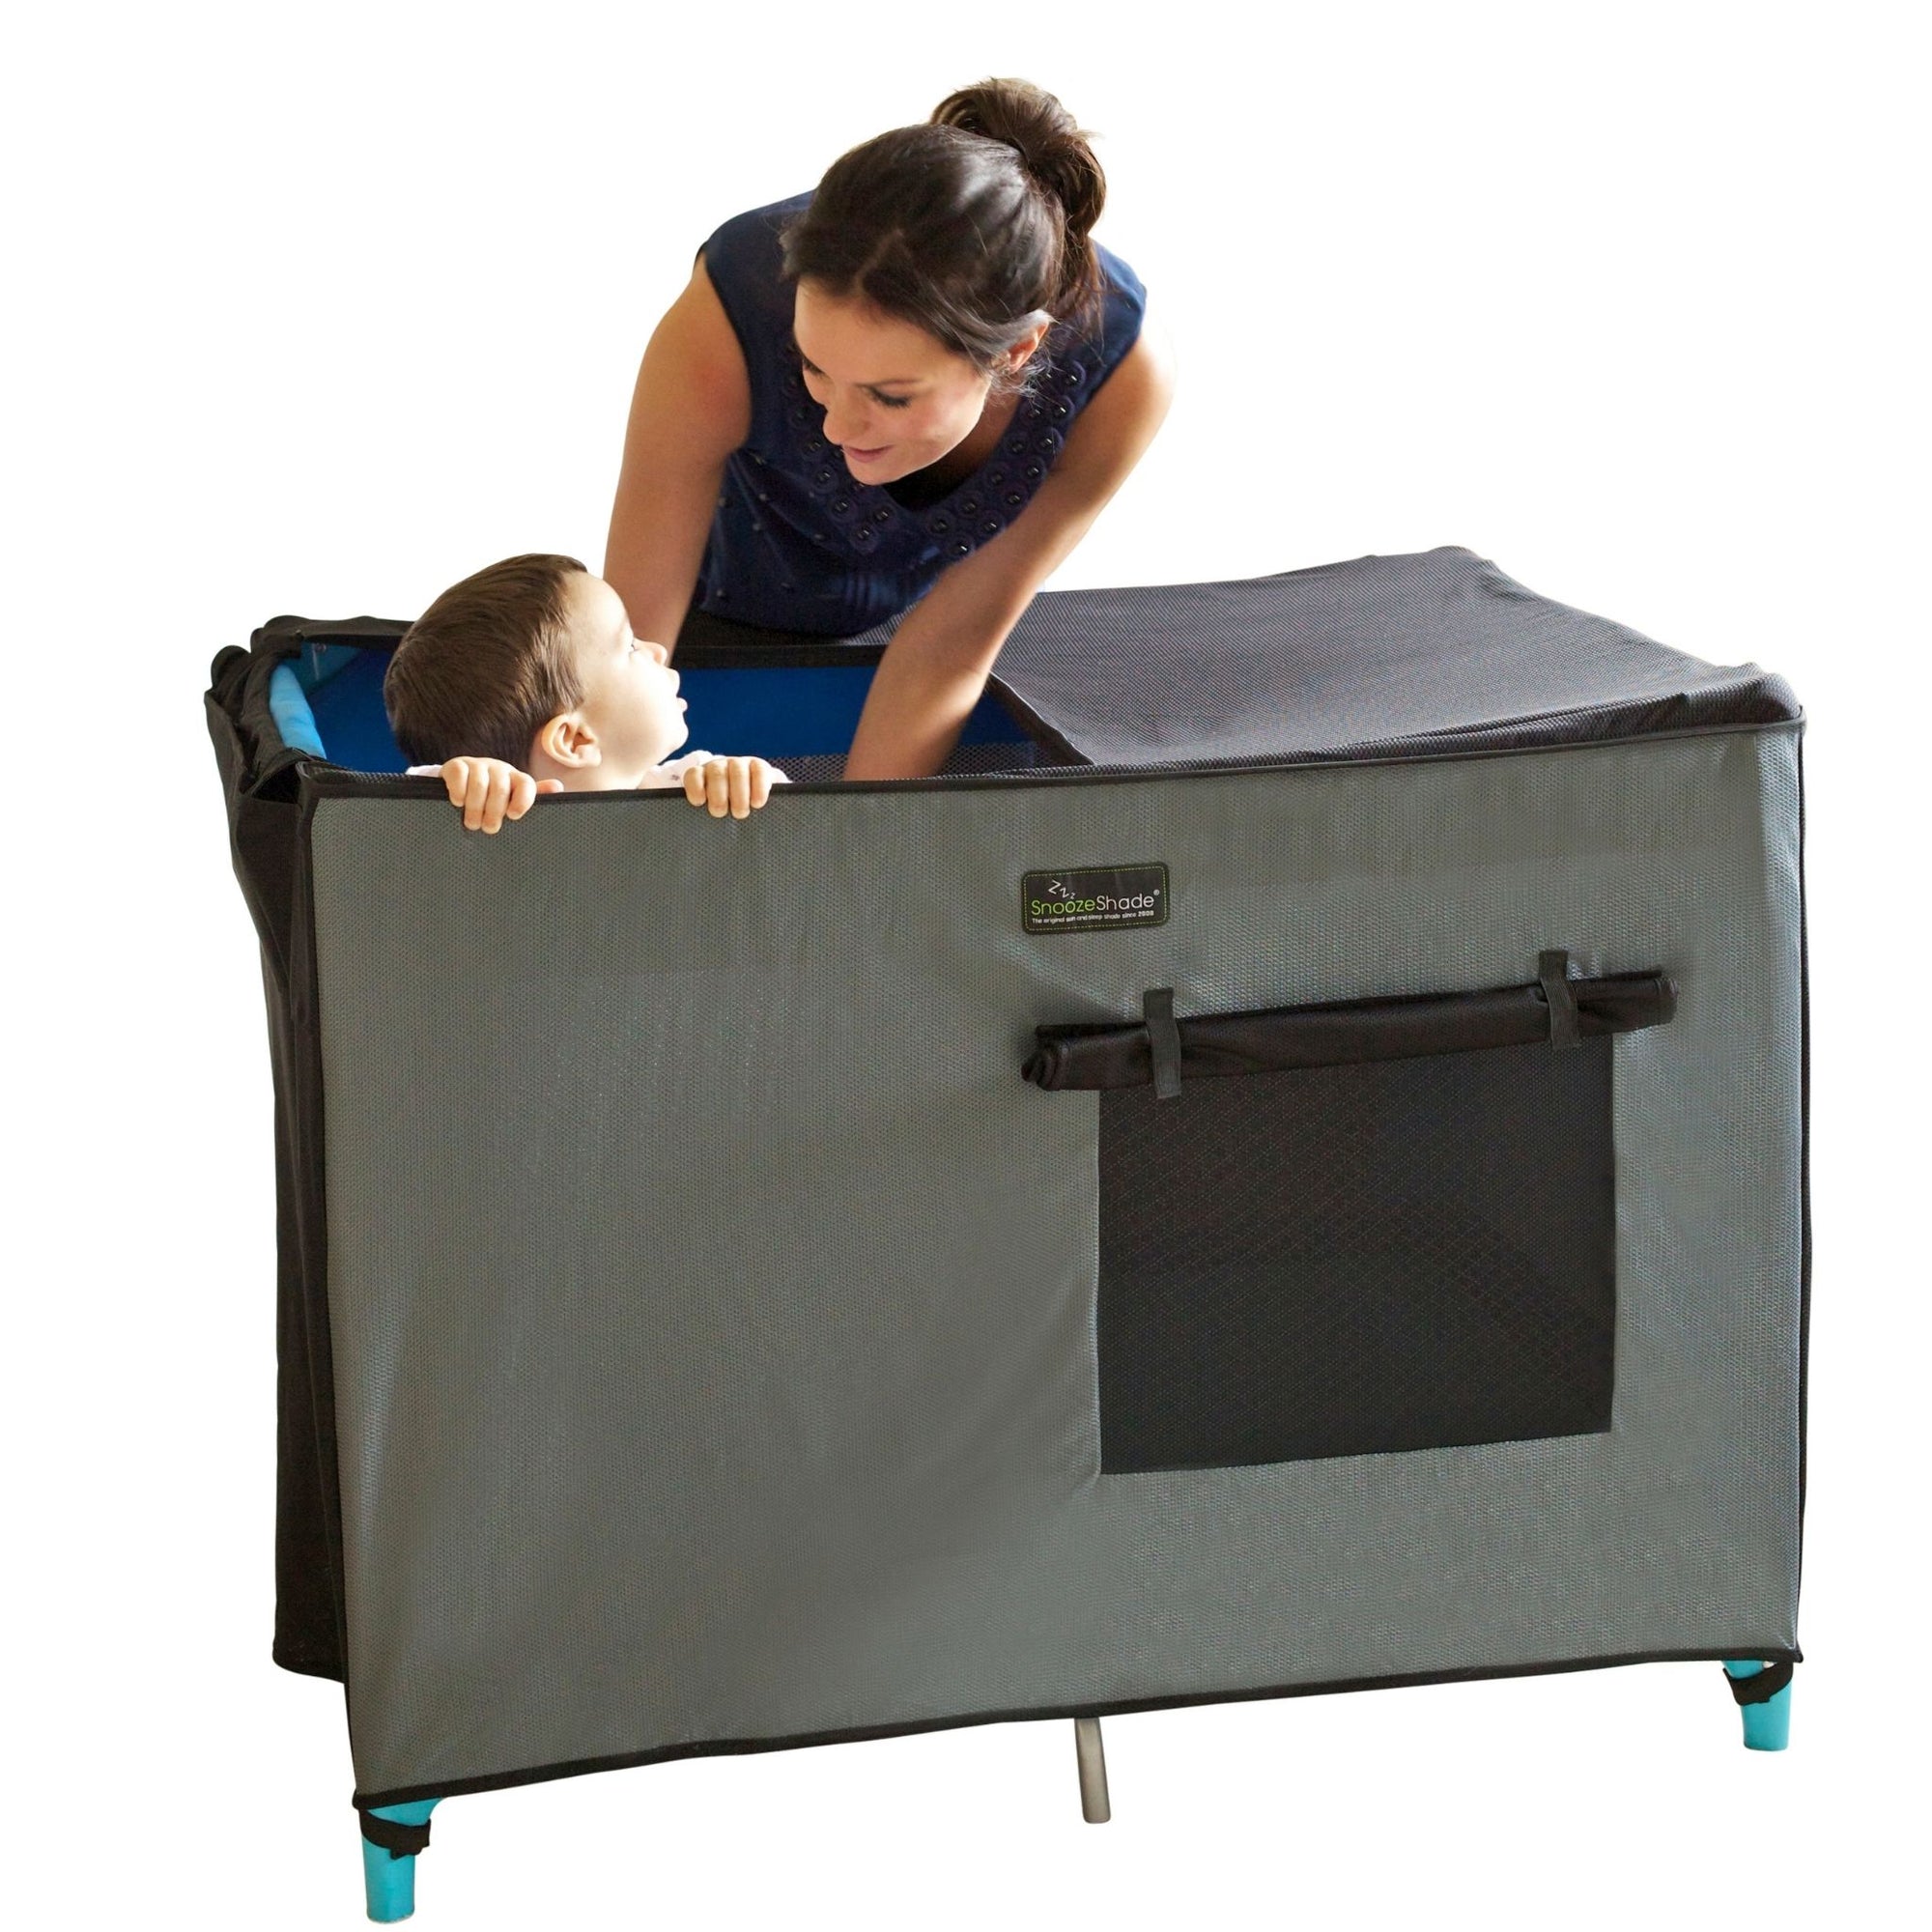 SnoozeShade for Travel Cots, Air-permeable blackout canopy